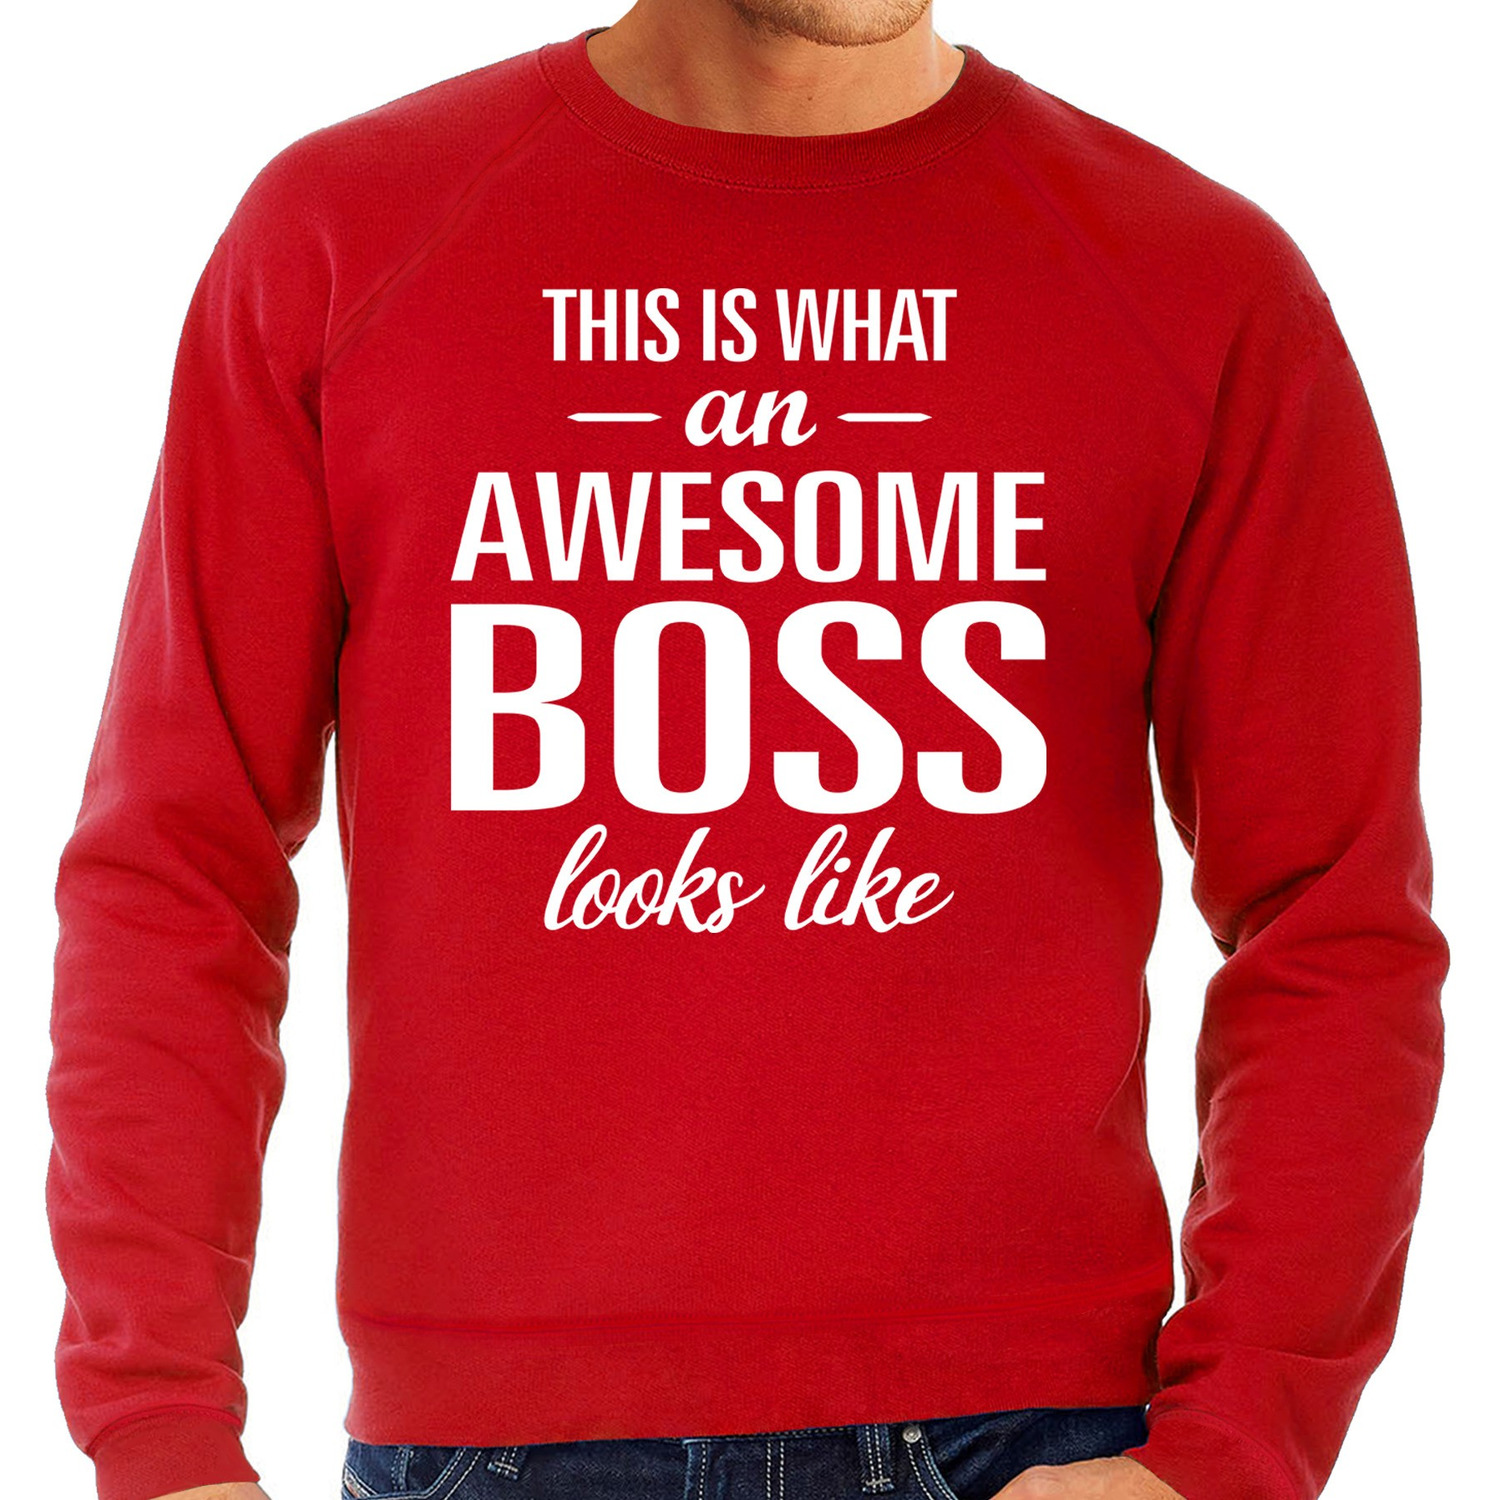 Awesome Boss-baas cadeau sweater rood voor heren